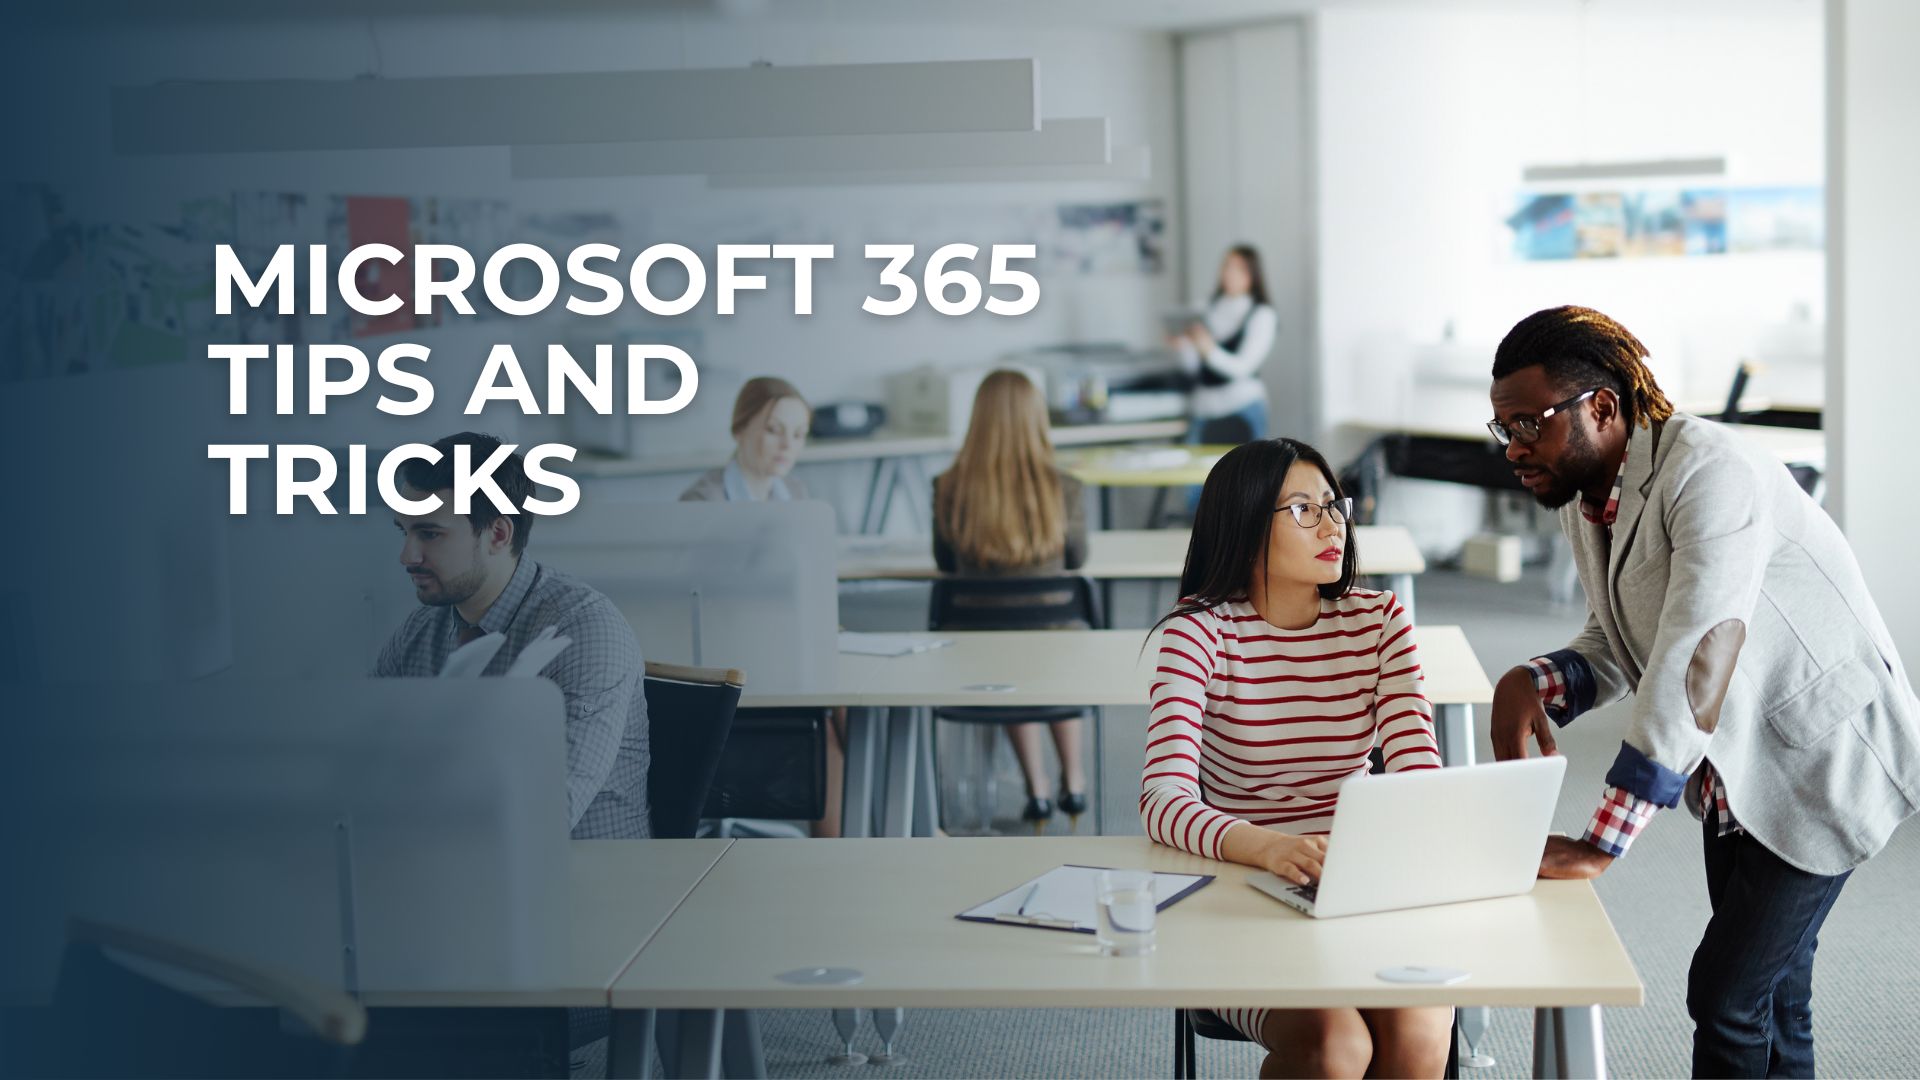 Microsoft 365 Pro User Tips and Tricks